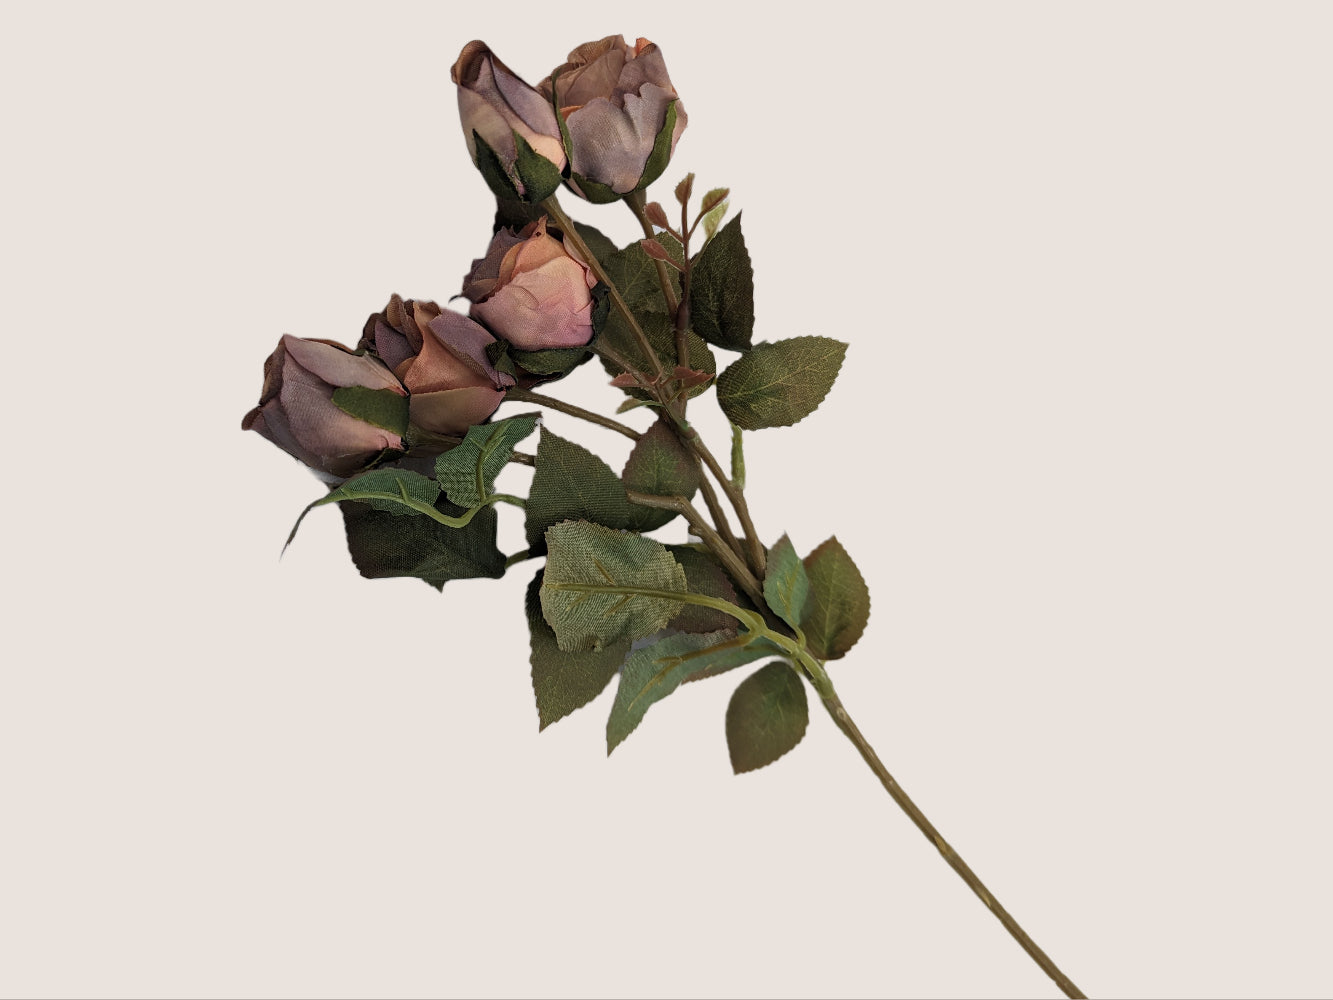 Artificial preserved-look roses - 17 inches tall, with mauve pink, purple, and light brown color scheme for a dried look. The stem has a green to brown gradient, serrated leaves with dark red tips, and small artificial buds for a lifelike appearance. Each stem features 5 flower heads. Pictured against a neutral beige background.